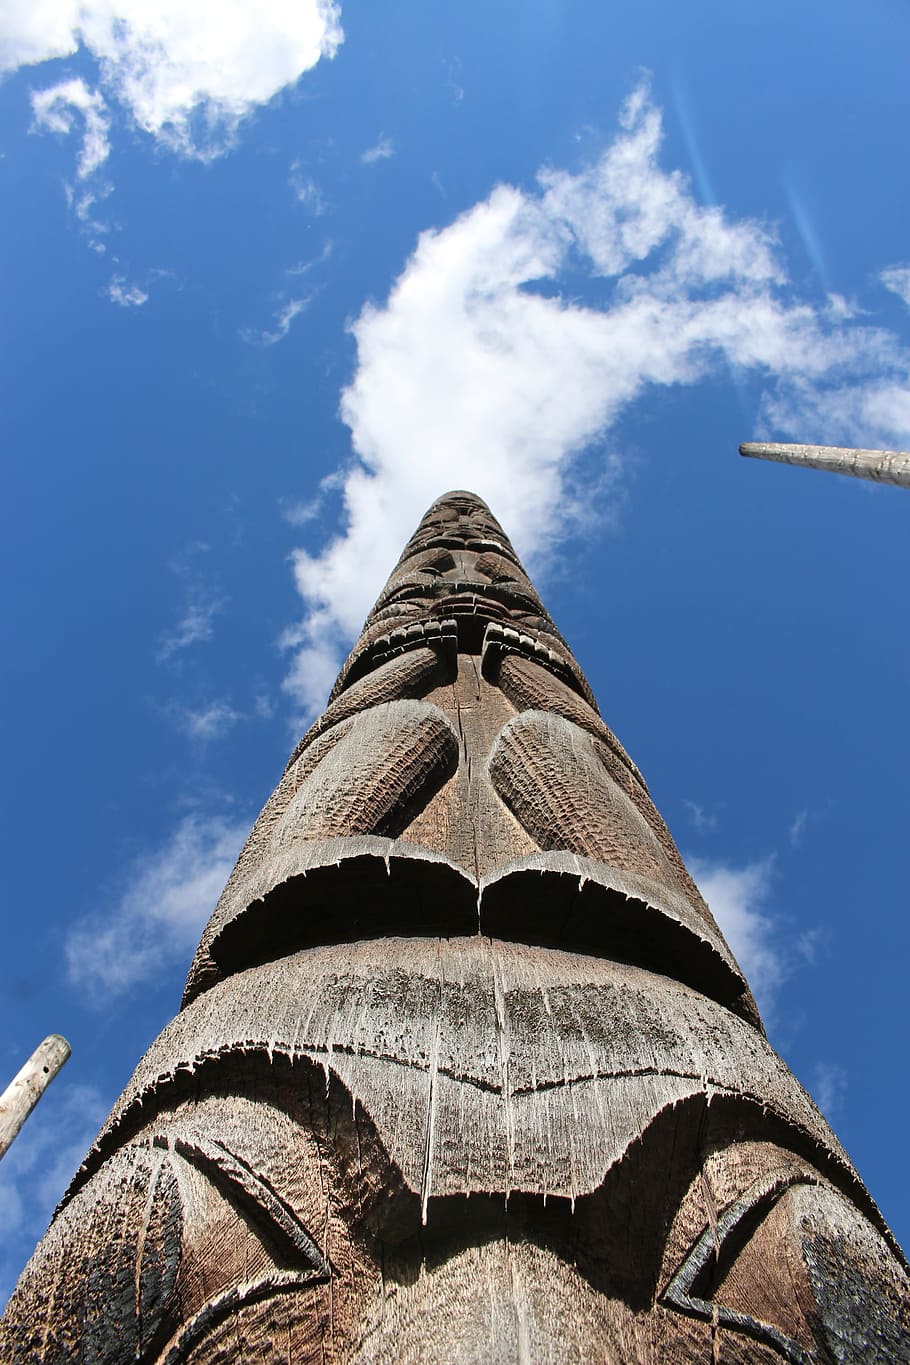 Stake, Totem Pole, Indians, Wild West, north america, kispiox, low angle view, cloud - sky, sky, history